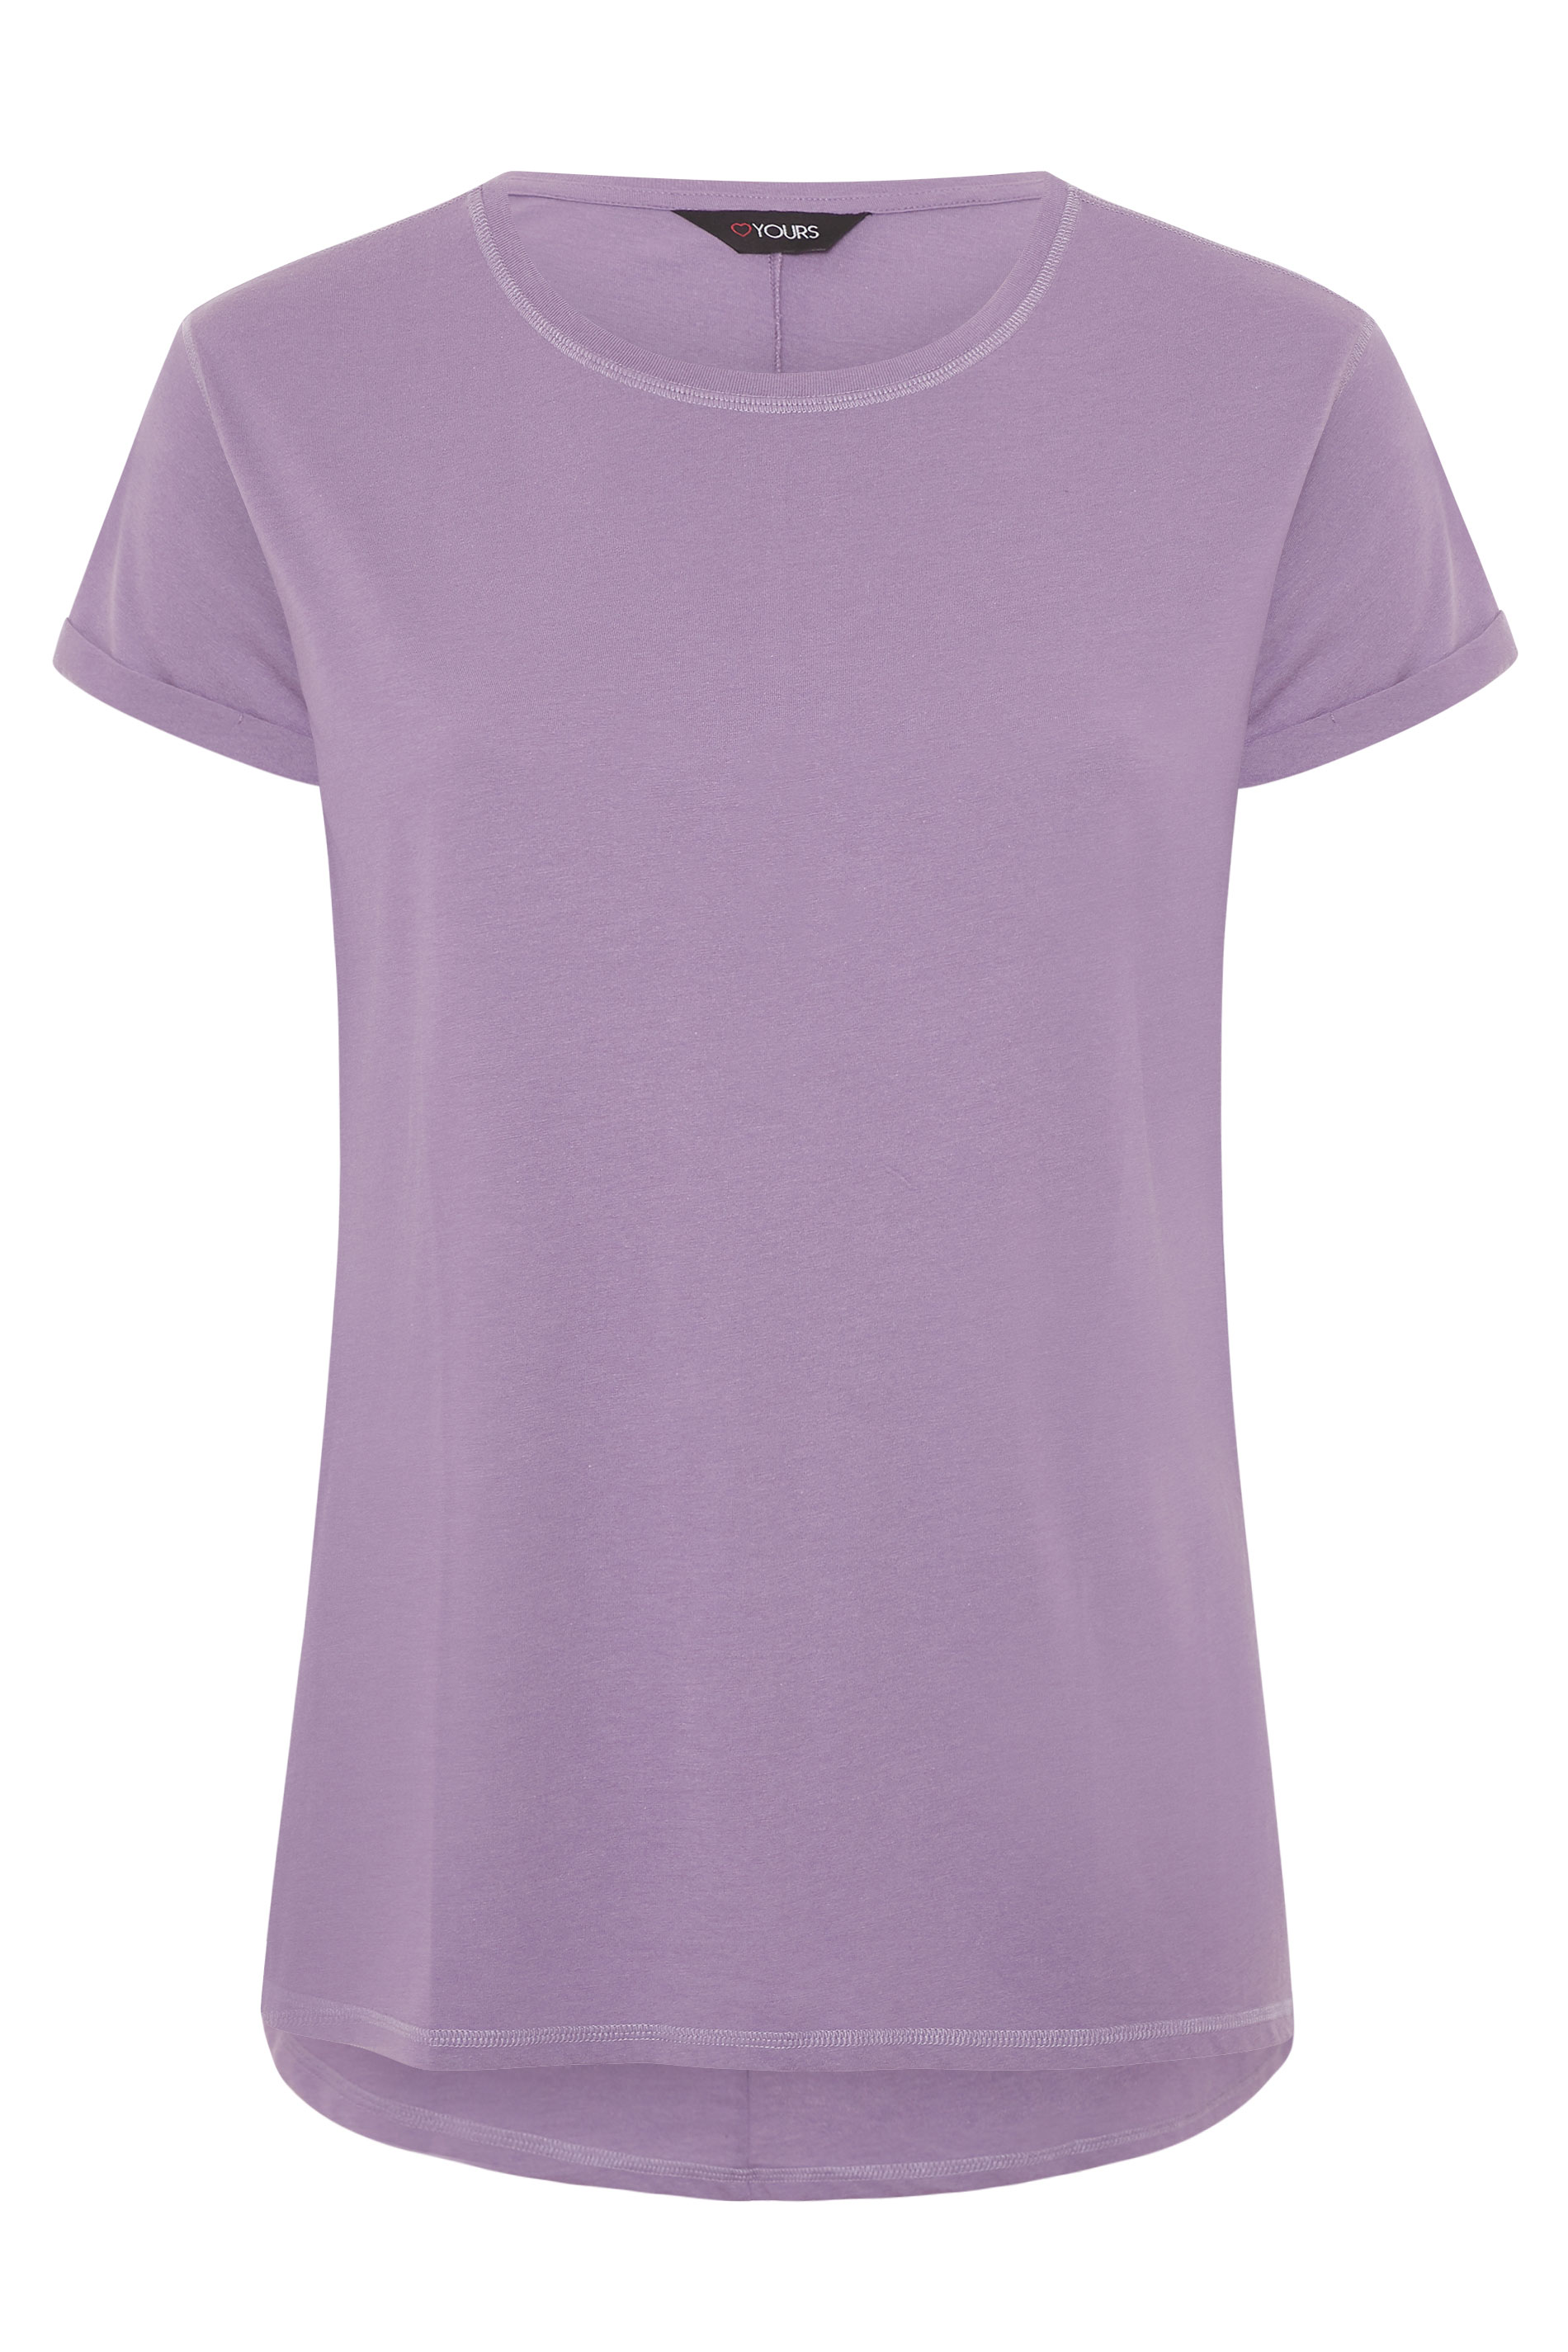 Lilac Topstitch Short Sleeve T-Shirt | Yours Clothing